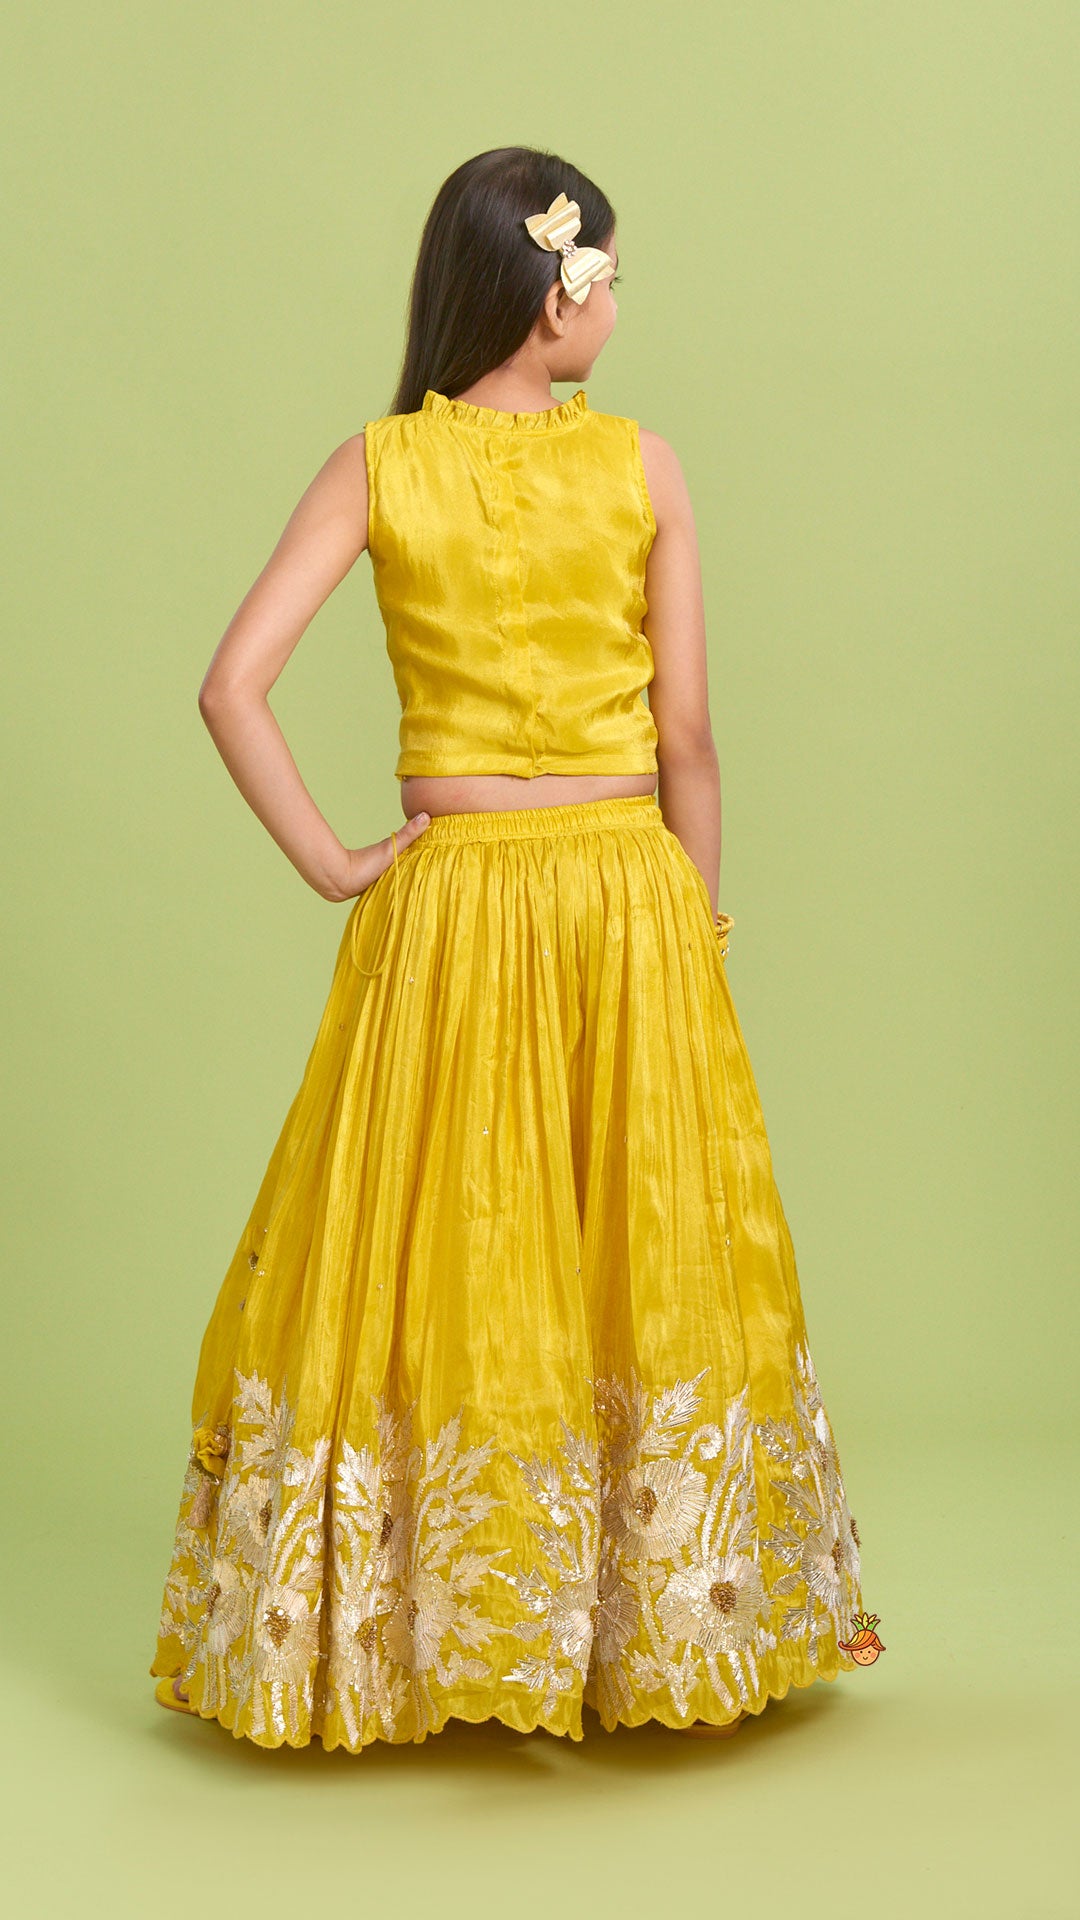 Pre Order: Sequins And Gota Lace Detailed Yellow Top And Lehenga